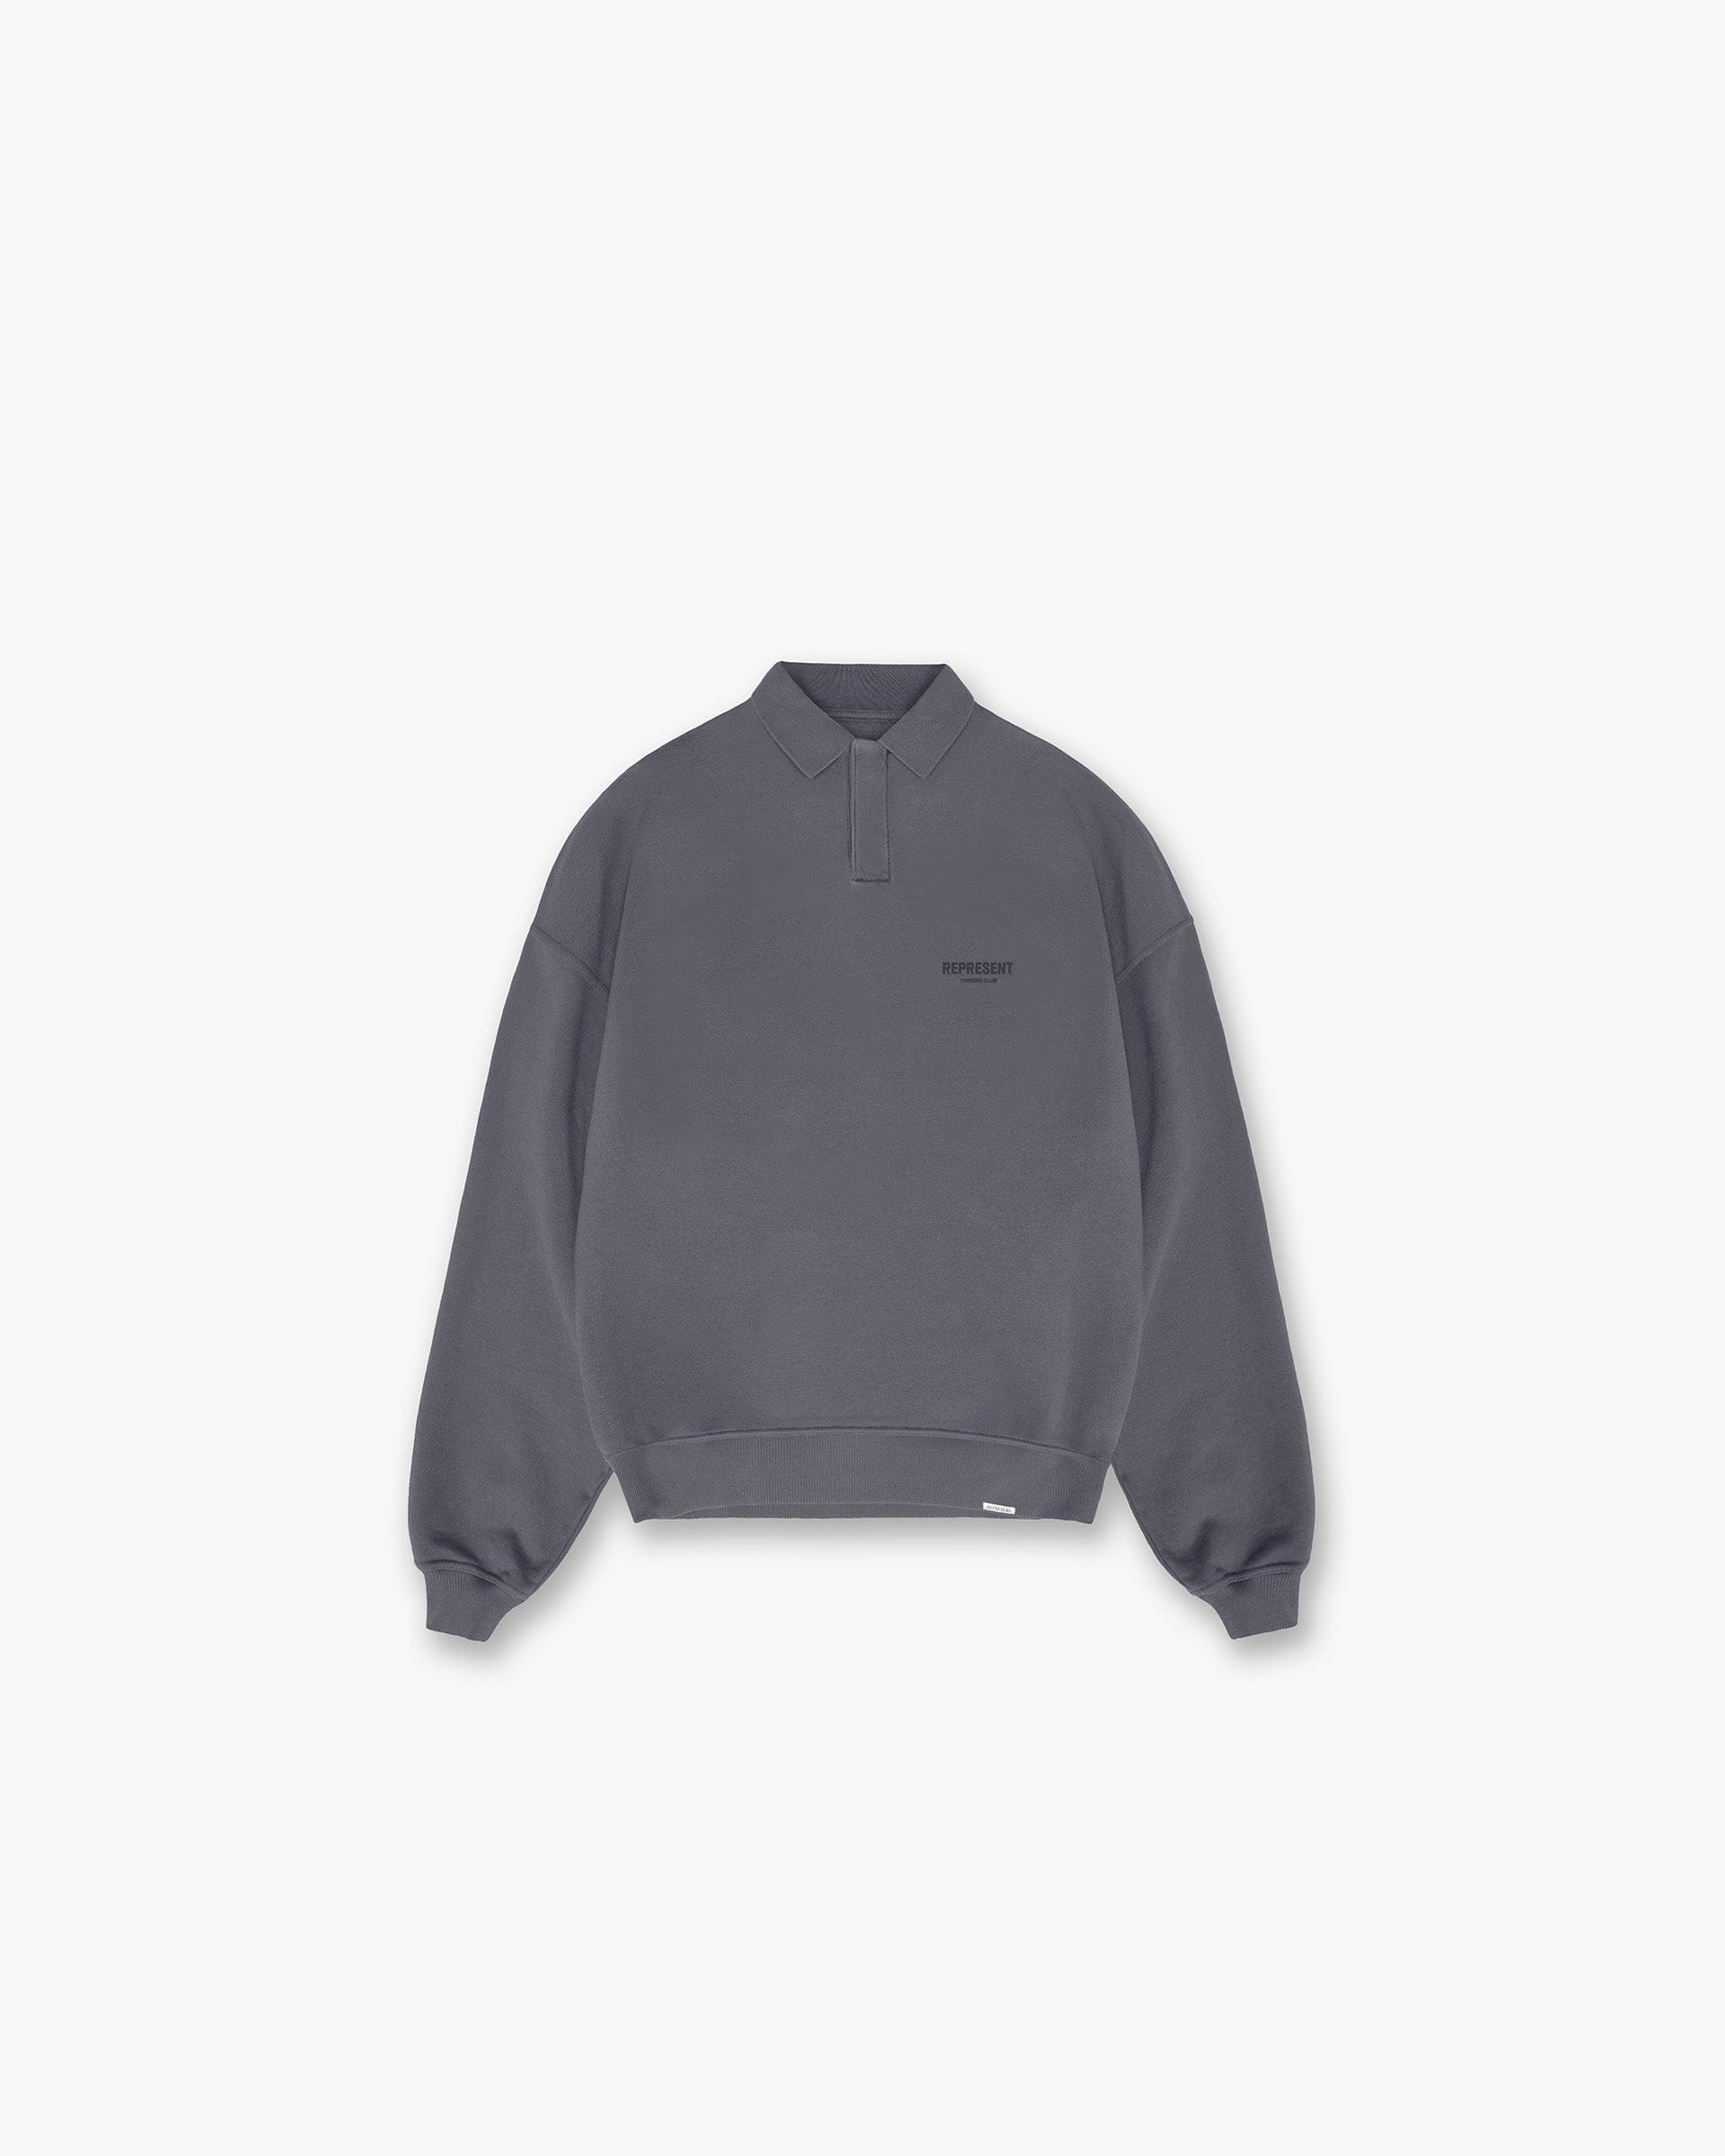 Represent Owners Club Long Sleeve Polo Sweater - Storm